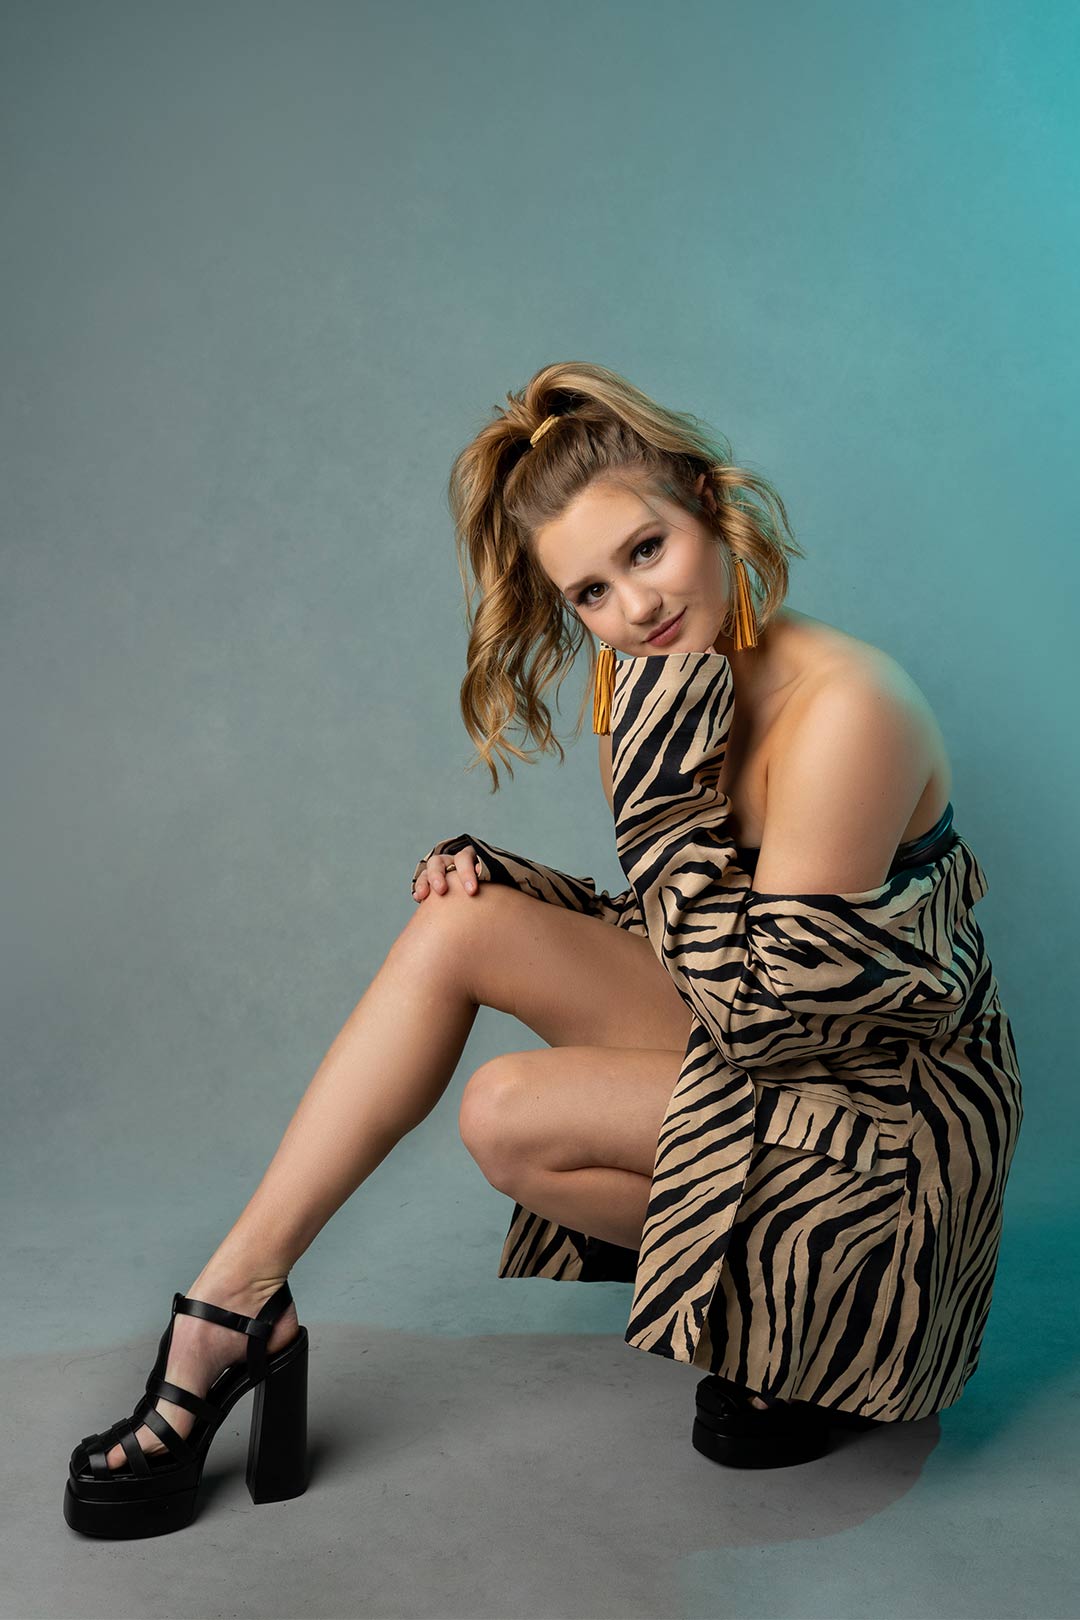 Edgy high school senior portrait of a girl in in a zebra print trench coat on a teal colored studio backdrop